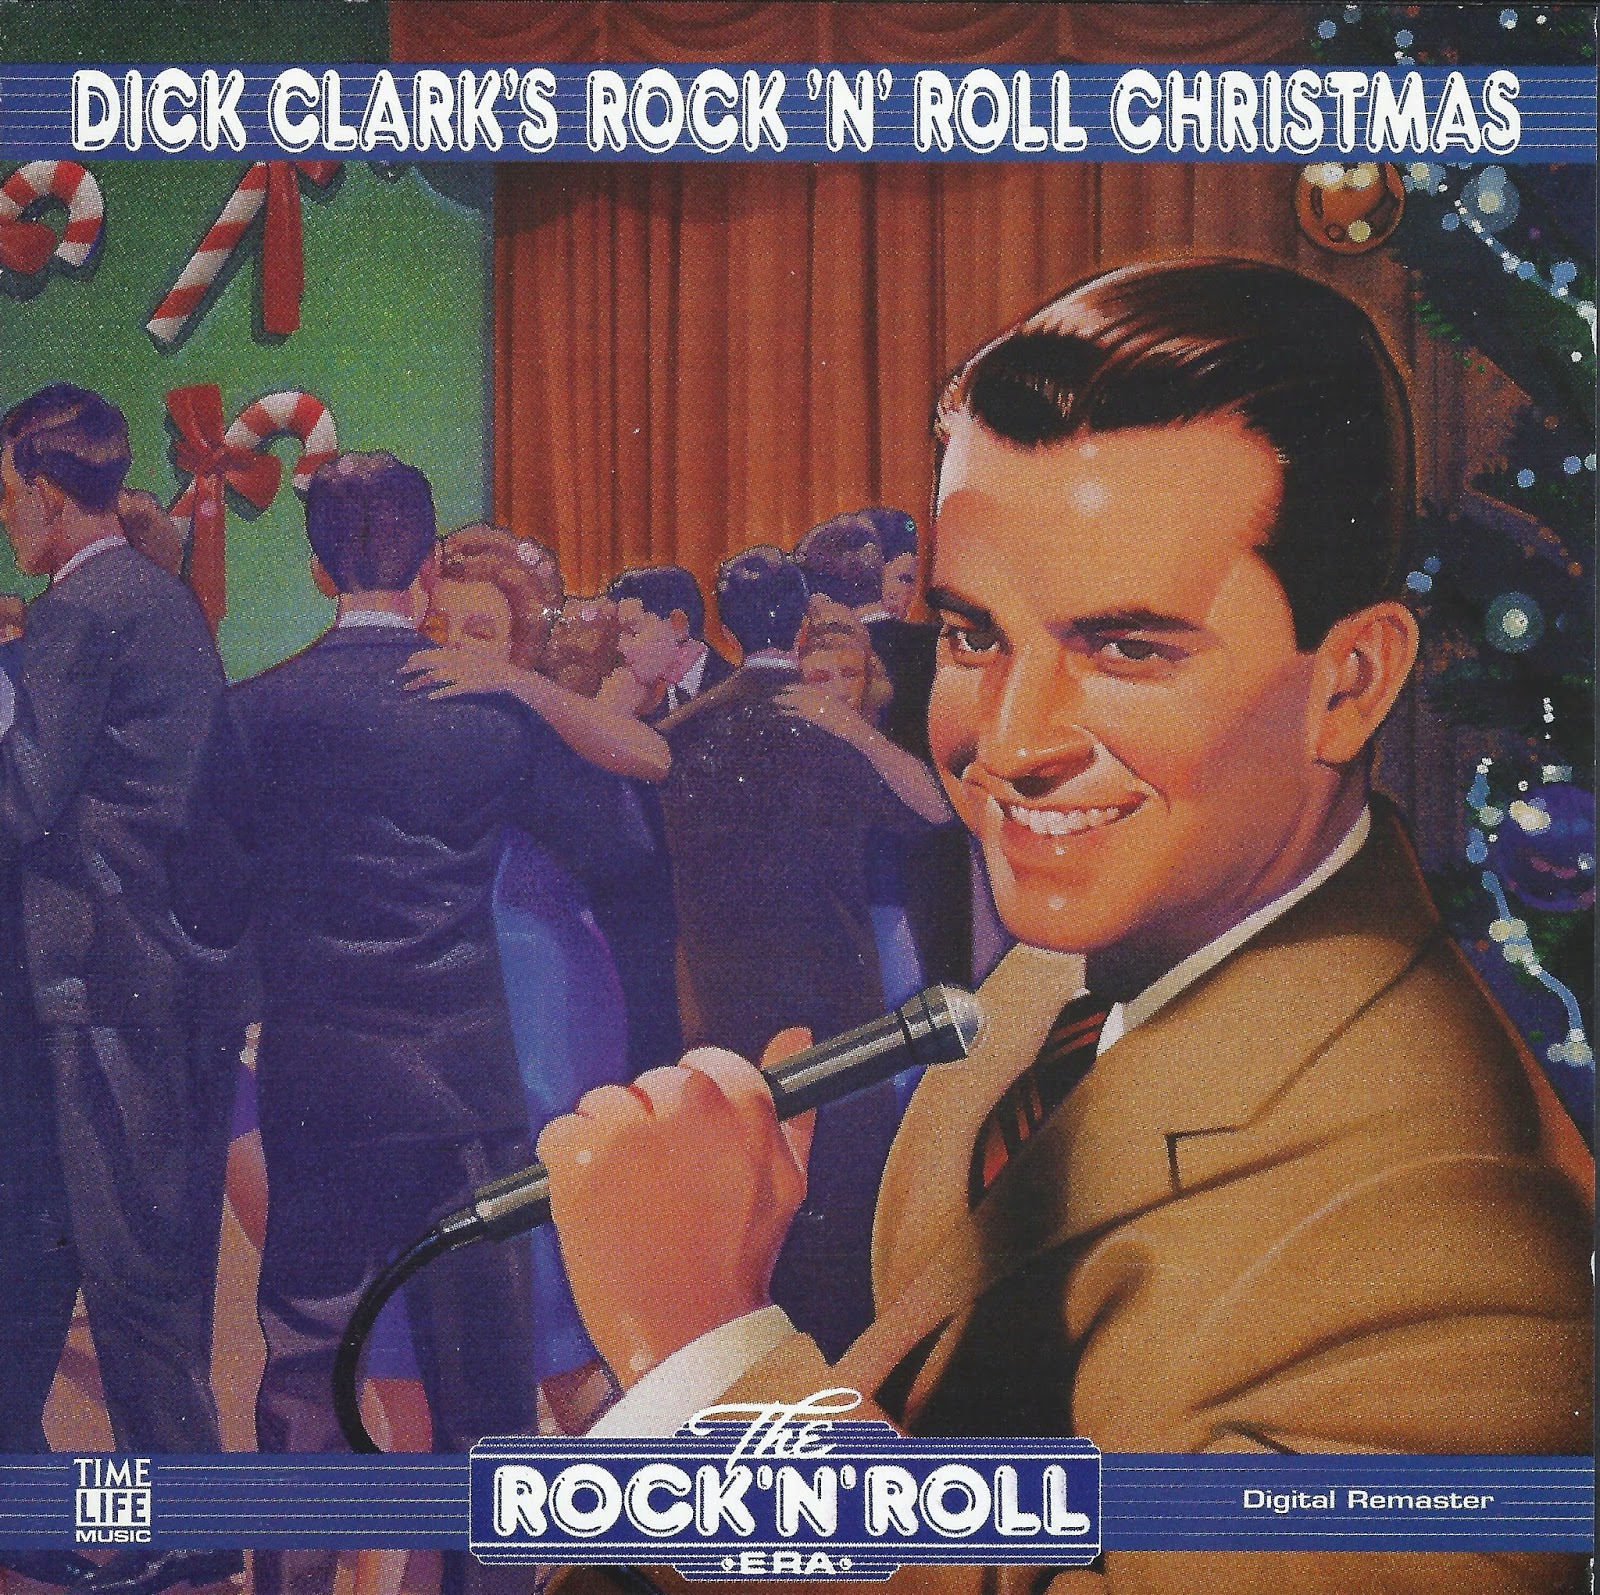 Dick clark's rock roll and remember book